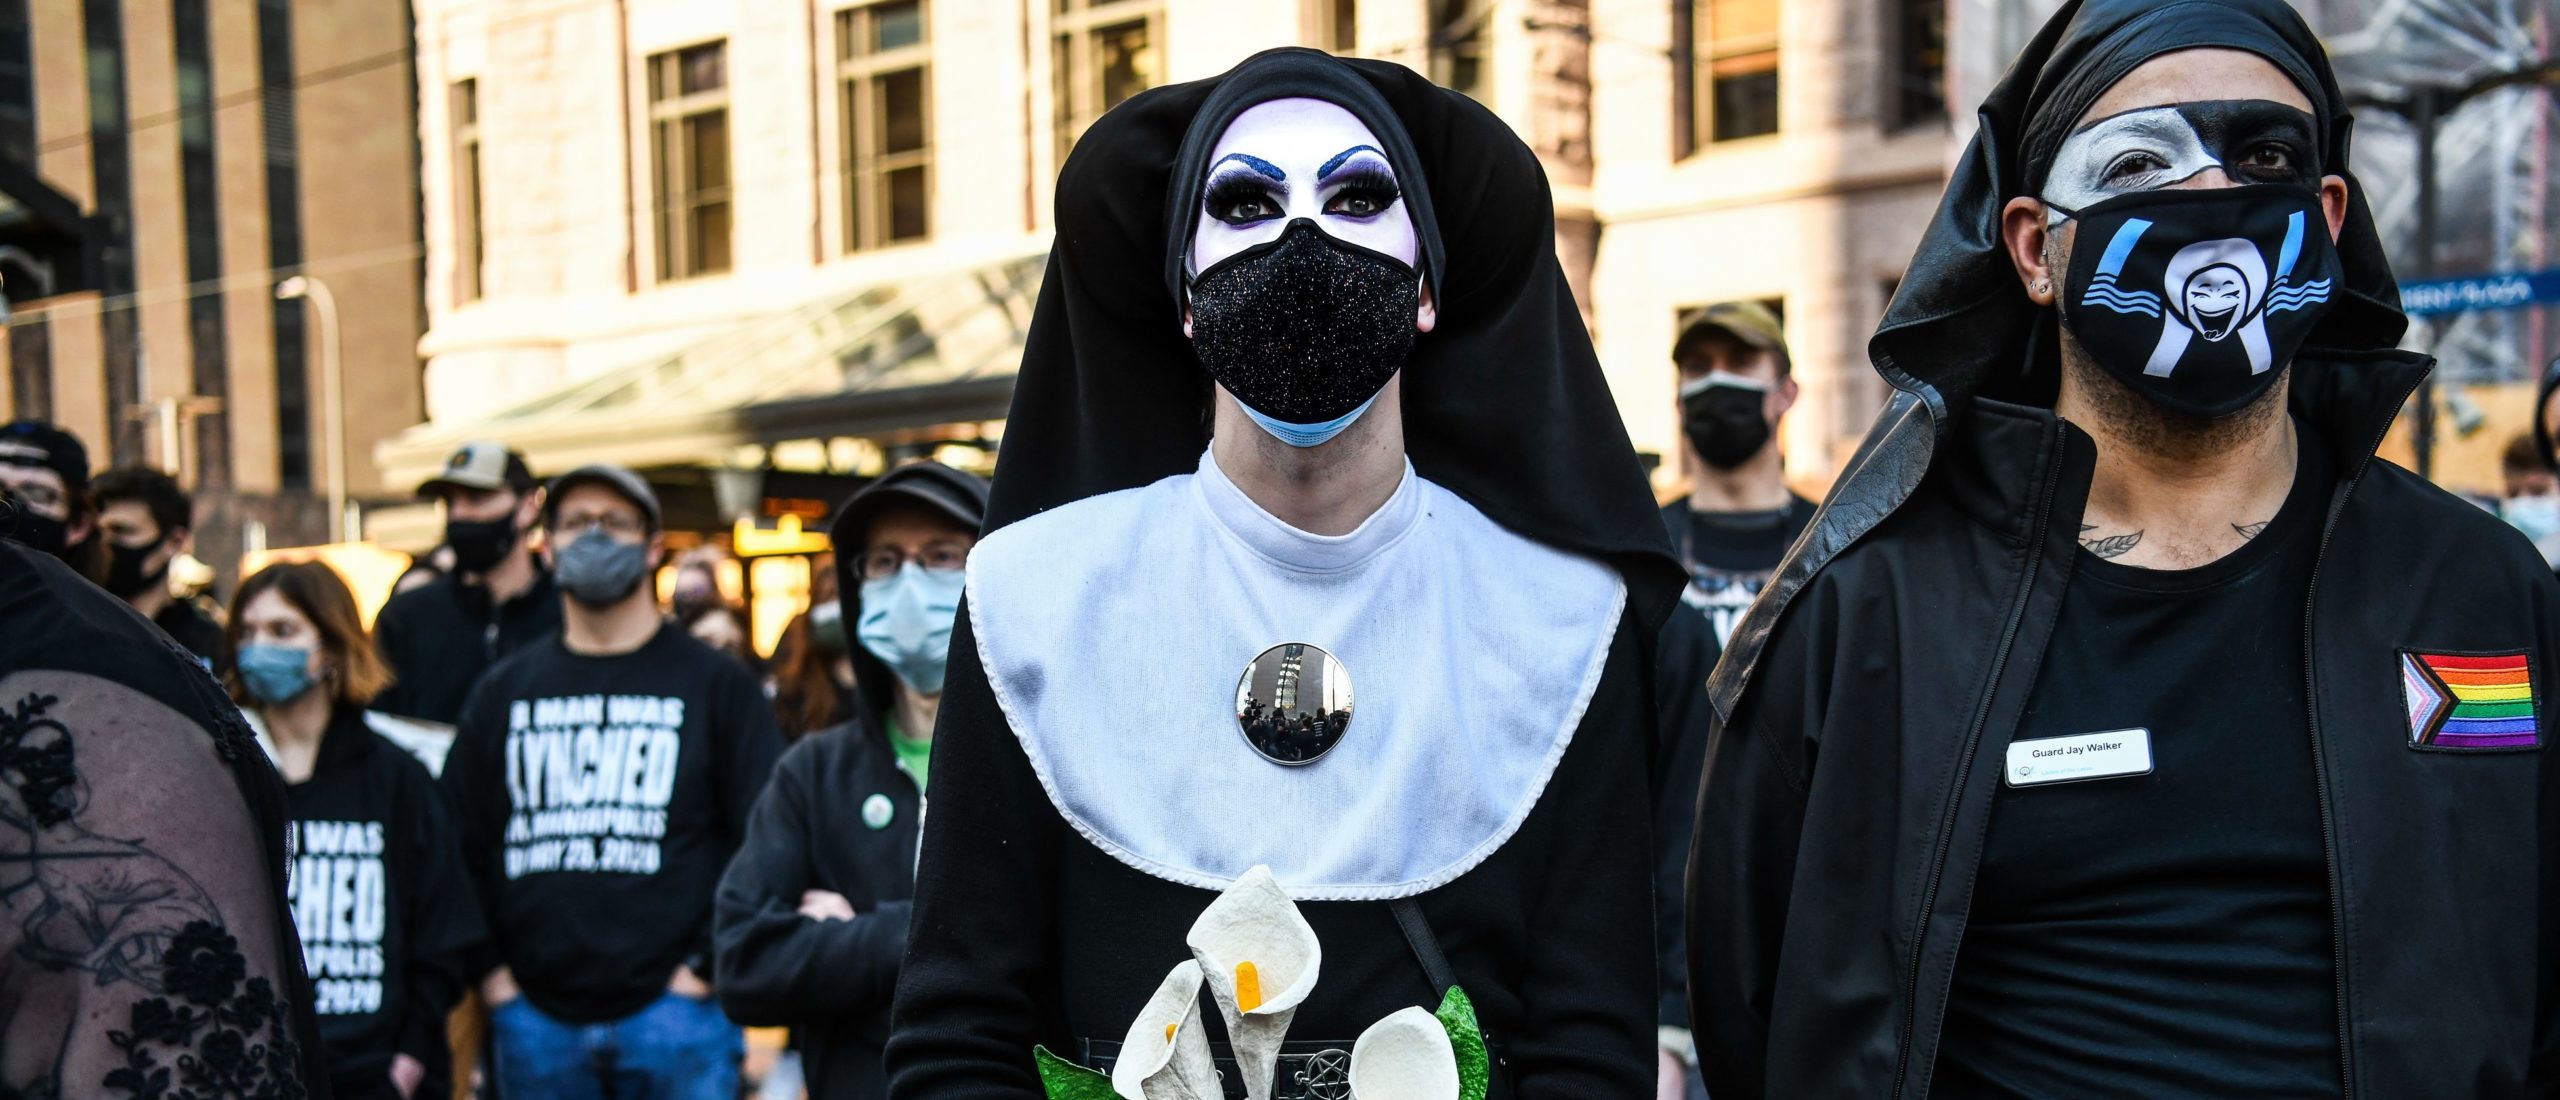 Members of Sisters of Perpetual Indulgence participate in the I Cant Breathe - Silent March for Justice in front of the Hennepin County Government Center on March 7, 2021, where the trial of former Minneapolis police officer Derek Chauvin, charged with murdering African American man George Floyd, will begin on March 8, 2021, in Minneapolis, Minnesota. (Photo by CHANDAN KHANNA/AFP via Getty Images)